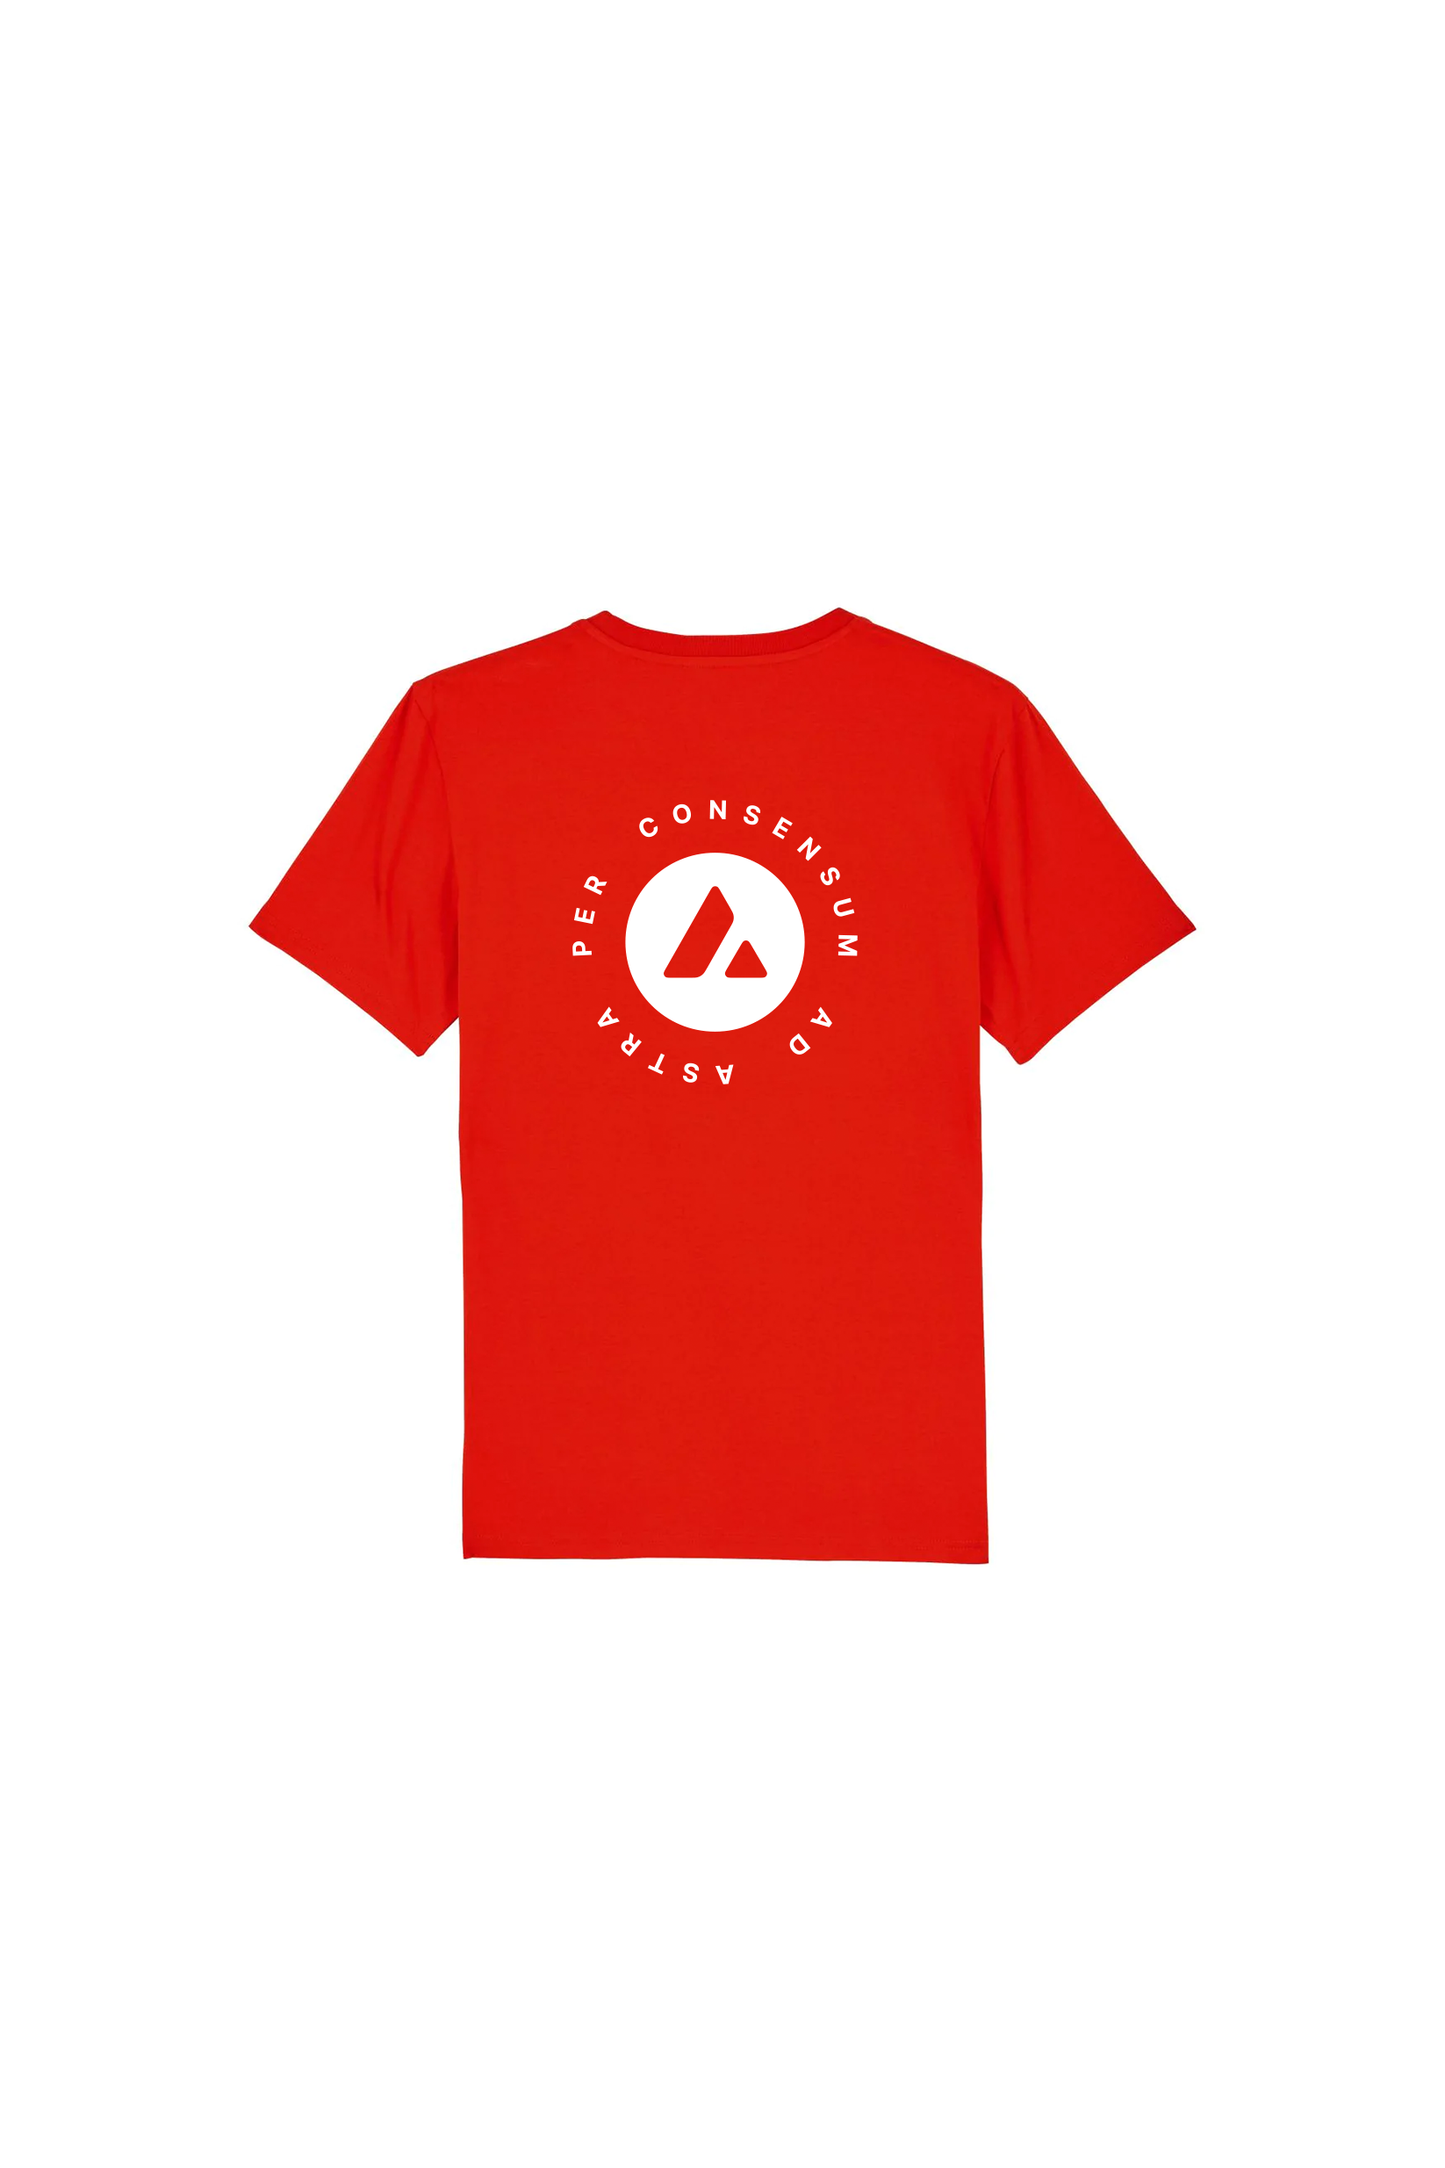 Ad Astra T-shirt - Red - AVAX Merchandise